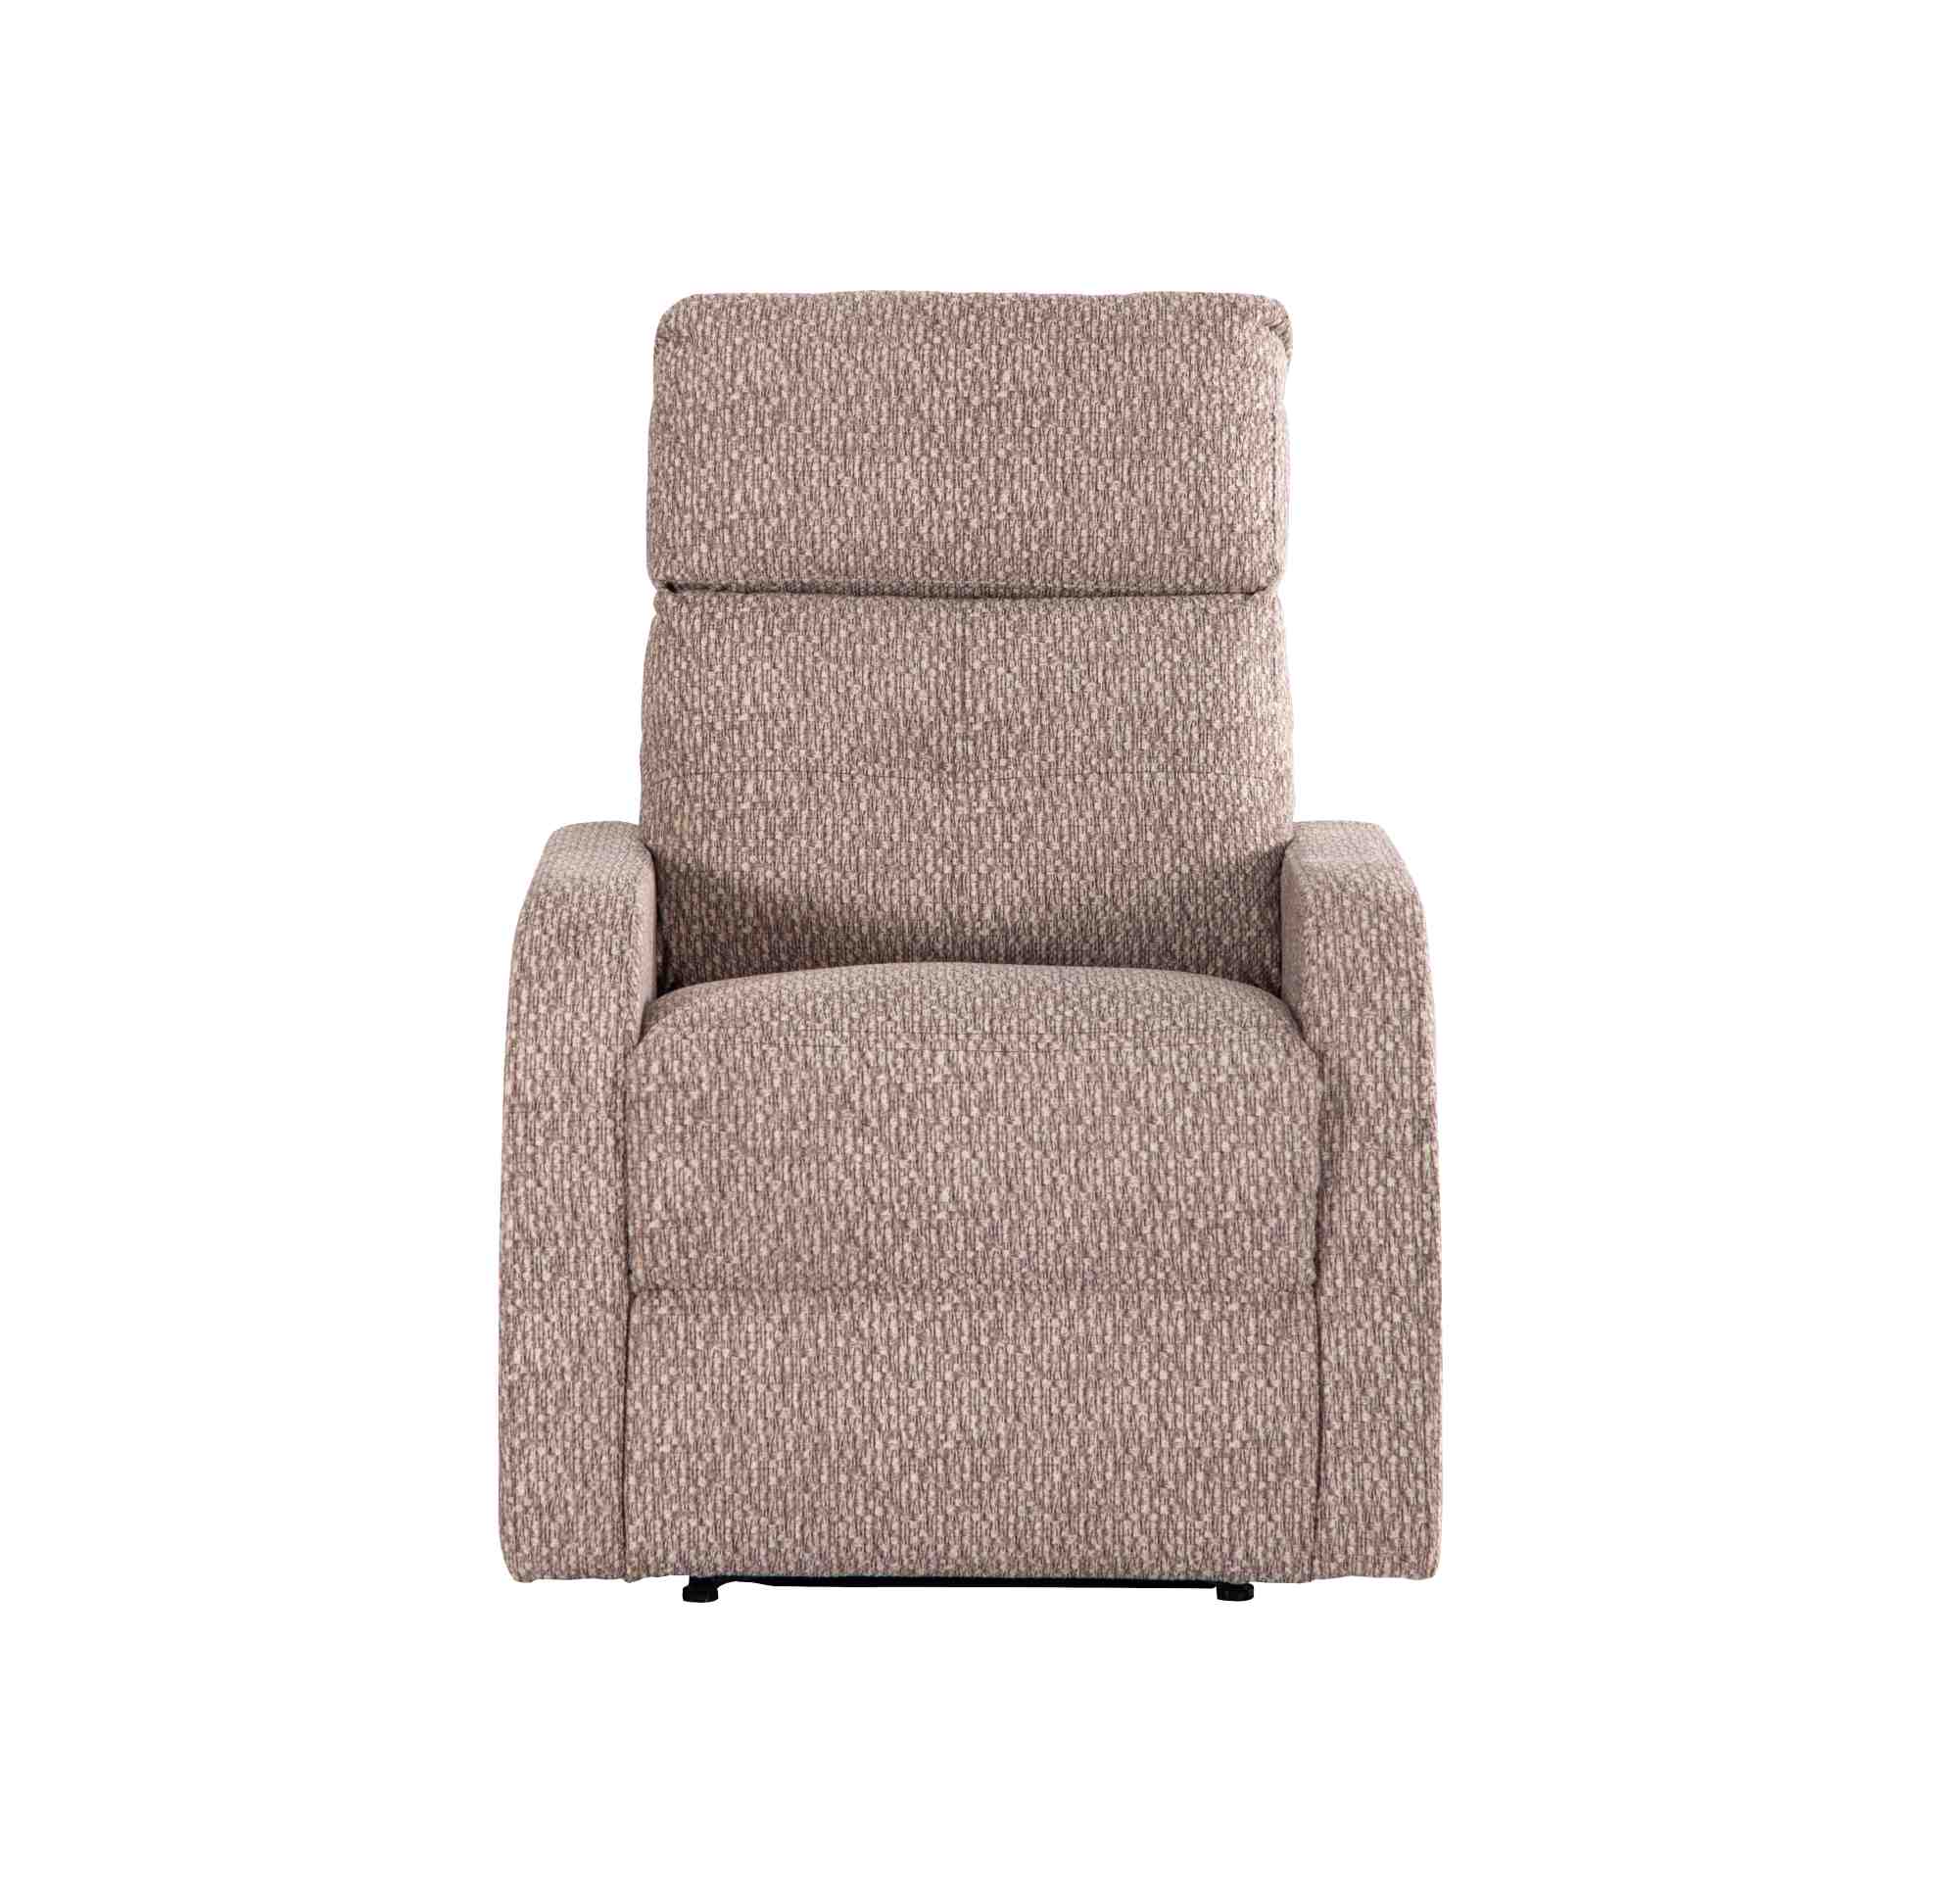 SDL001R-Dilon Sofa 1 Seater With Recliner-NO01